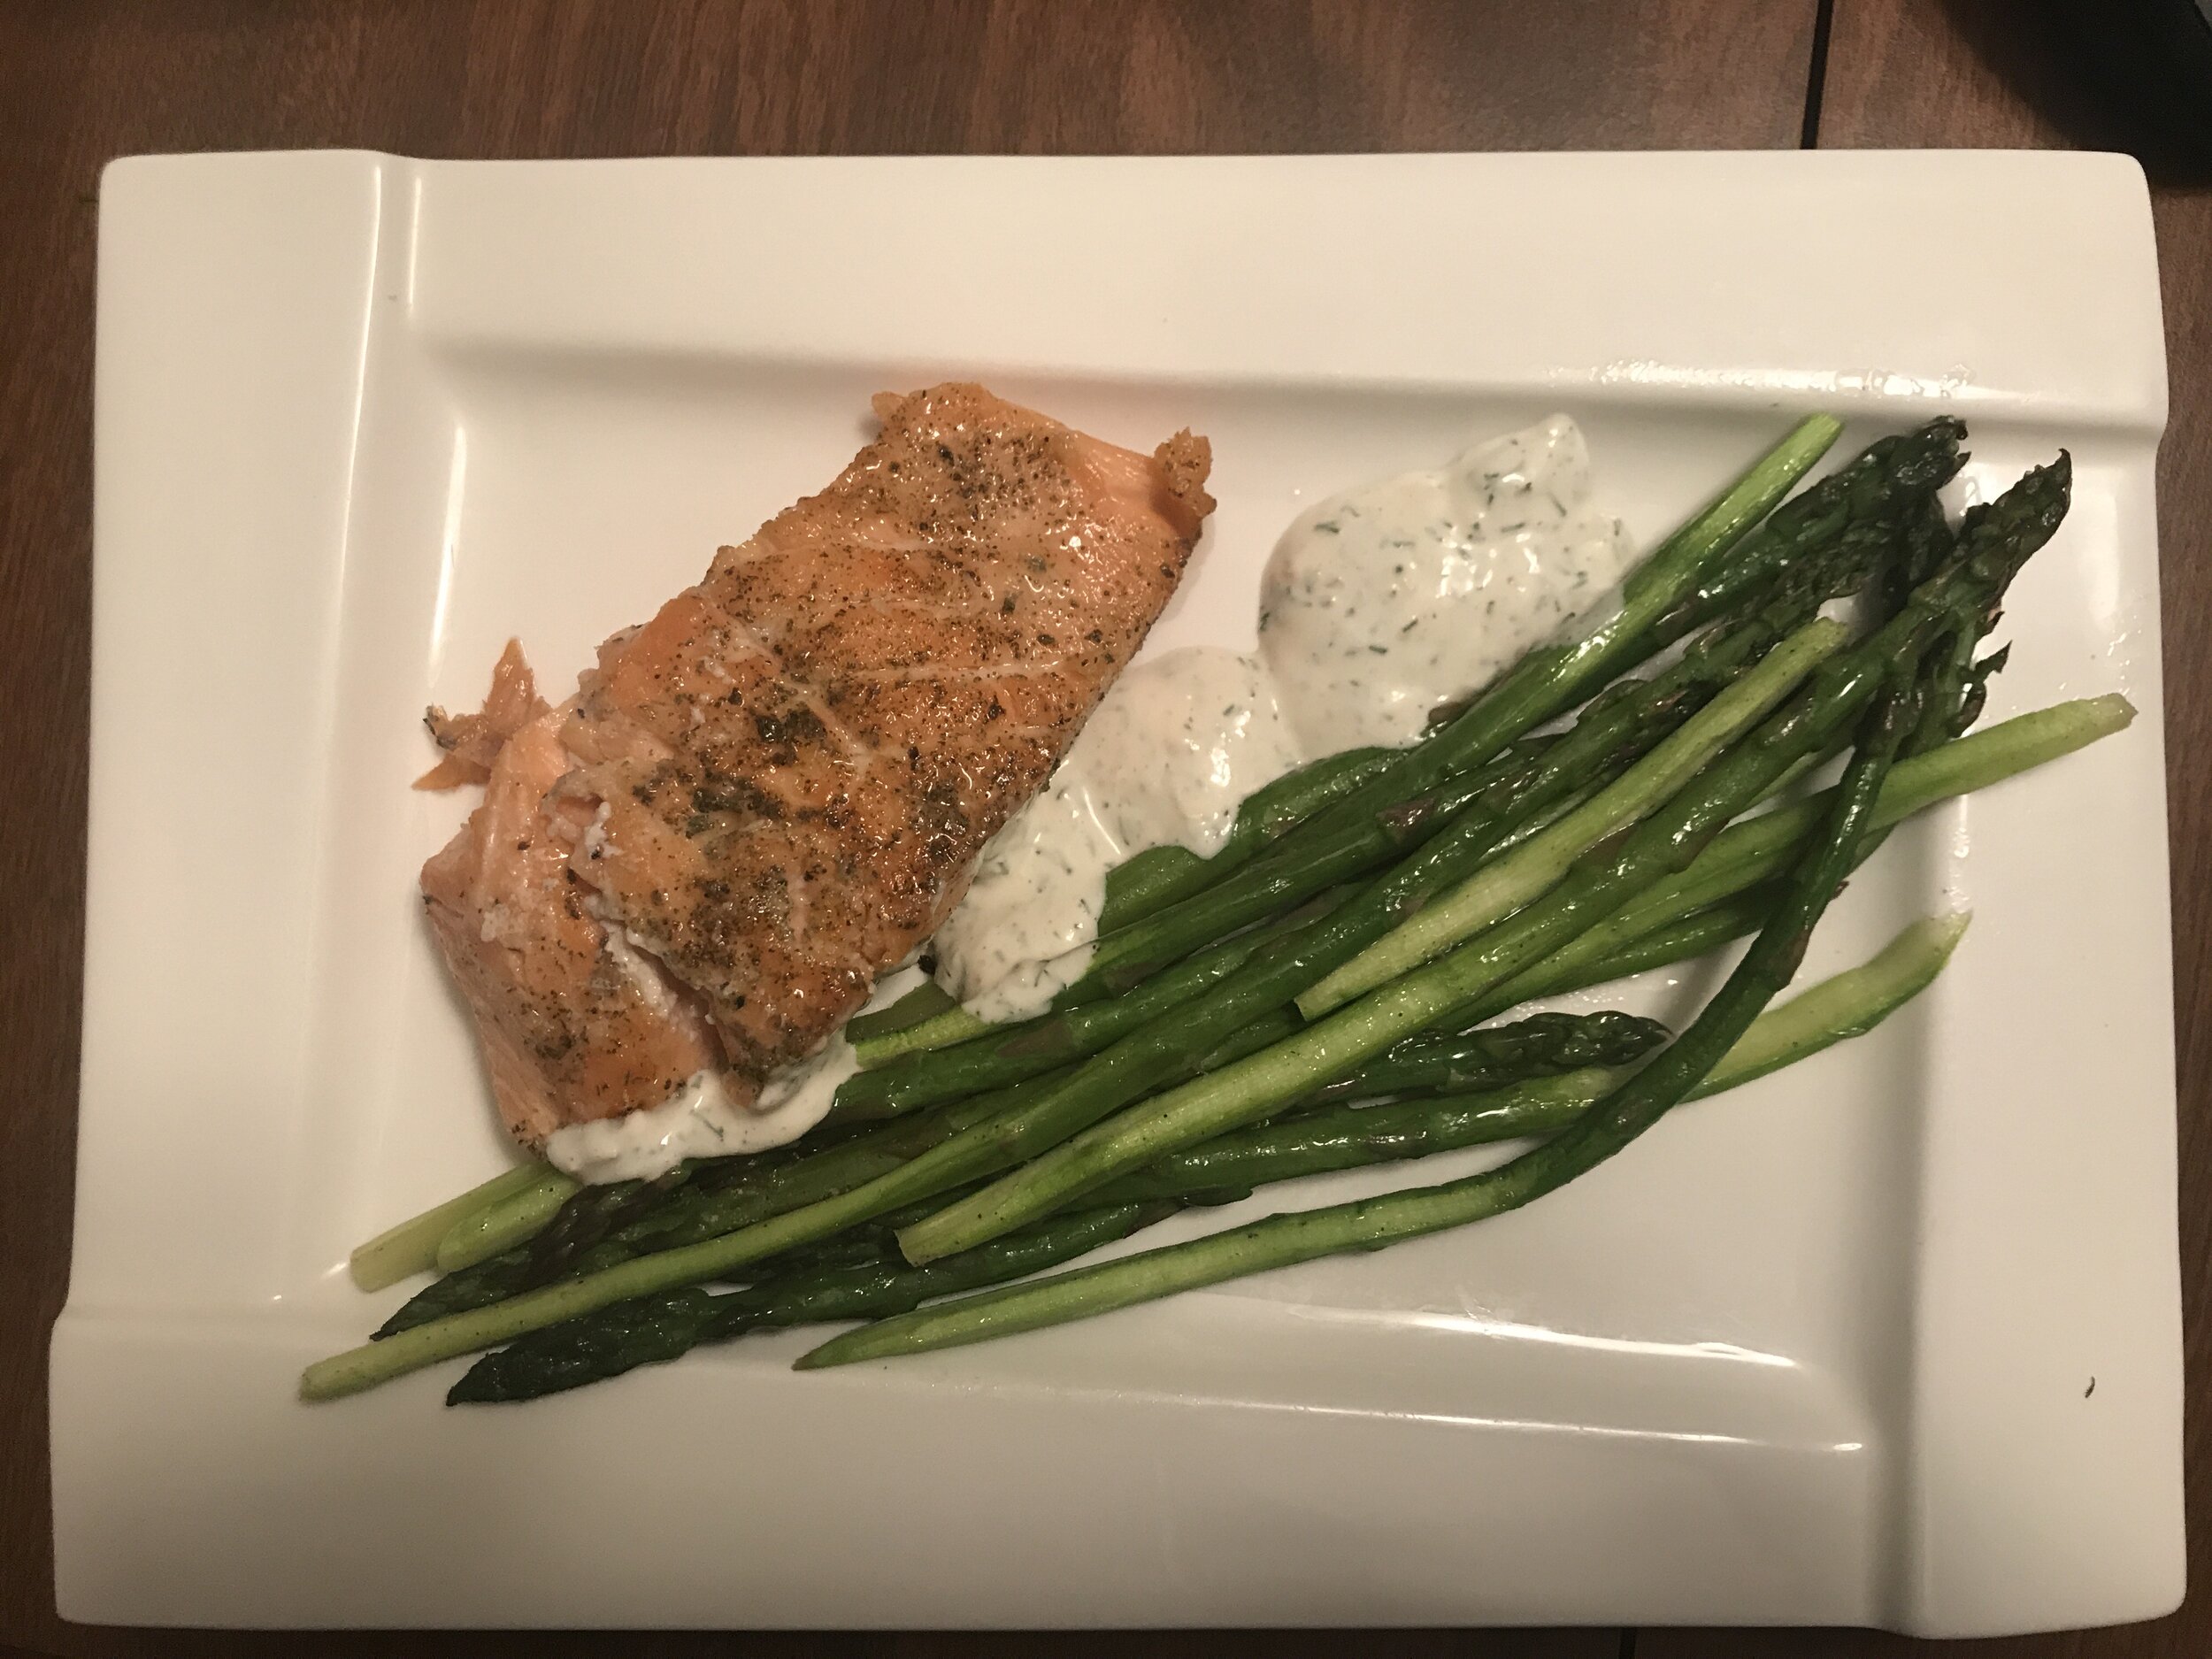 Diane's finished product--Salmon with dill sauce and roasted asparagus  sess 6.jpg